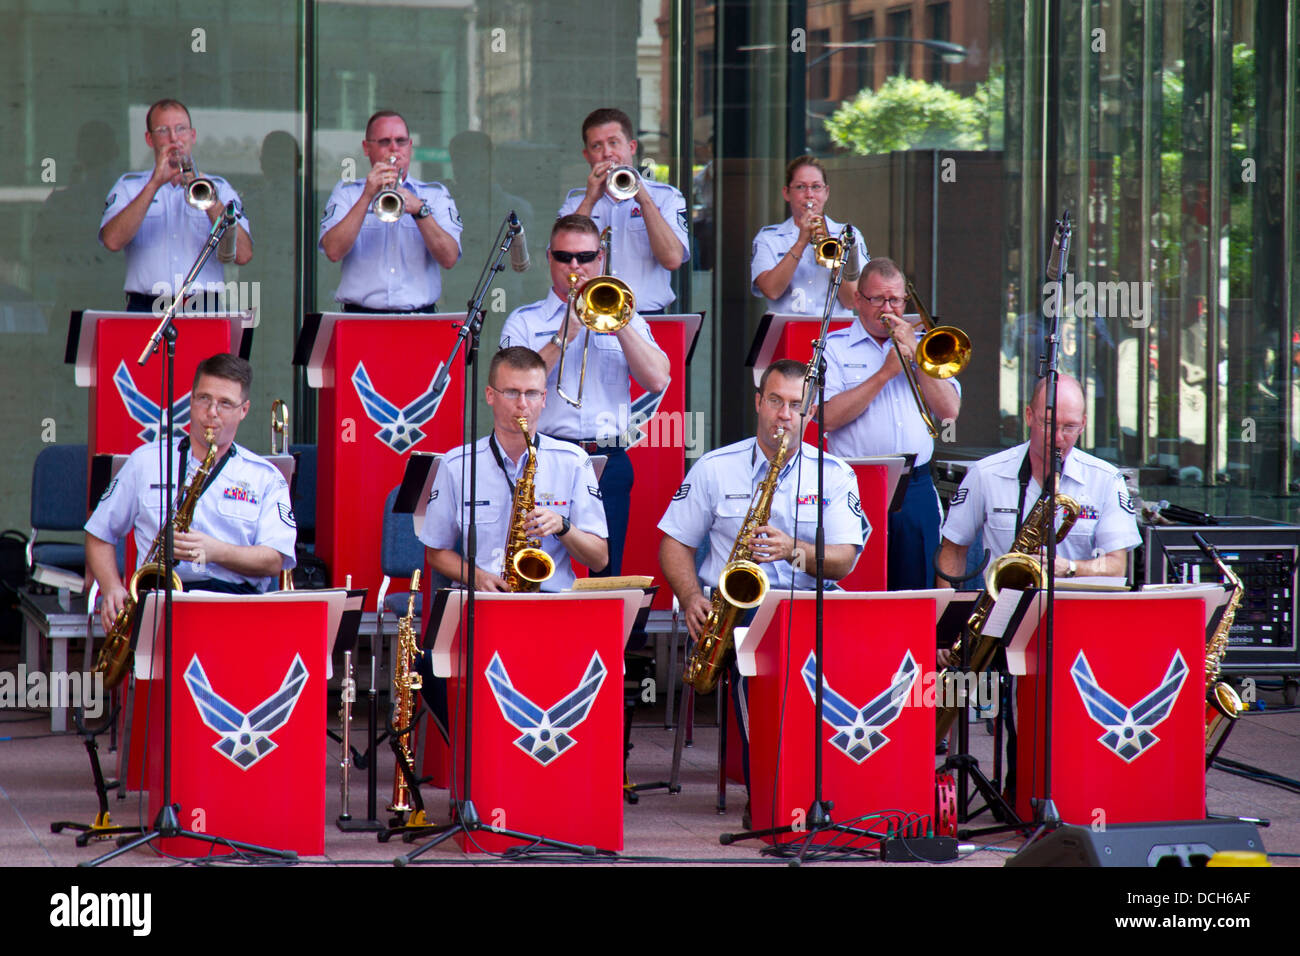 The U.S. air force 'Band of Mid-America' playing on a street in Chicago, Illinois, USA Stock Photo